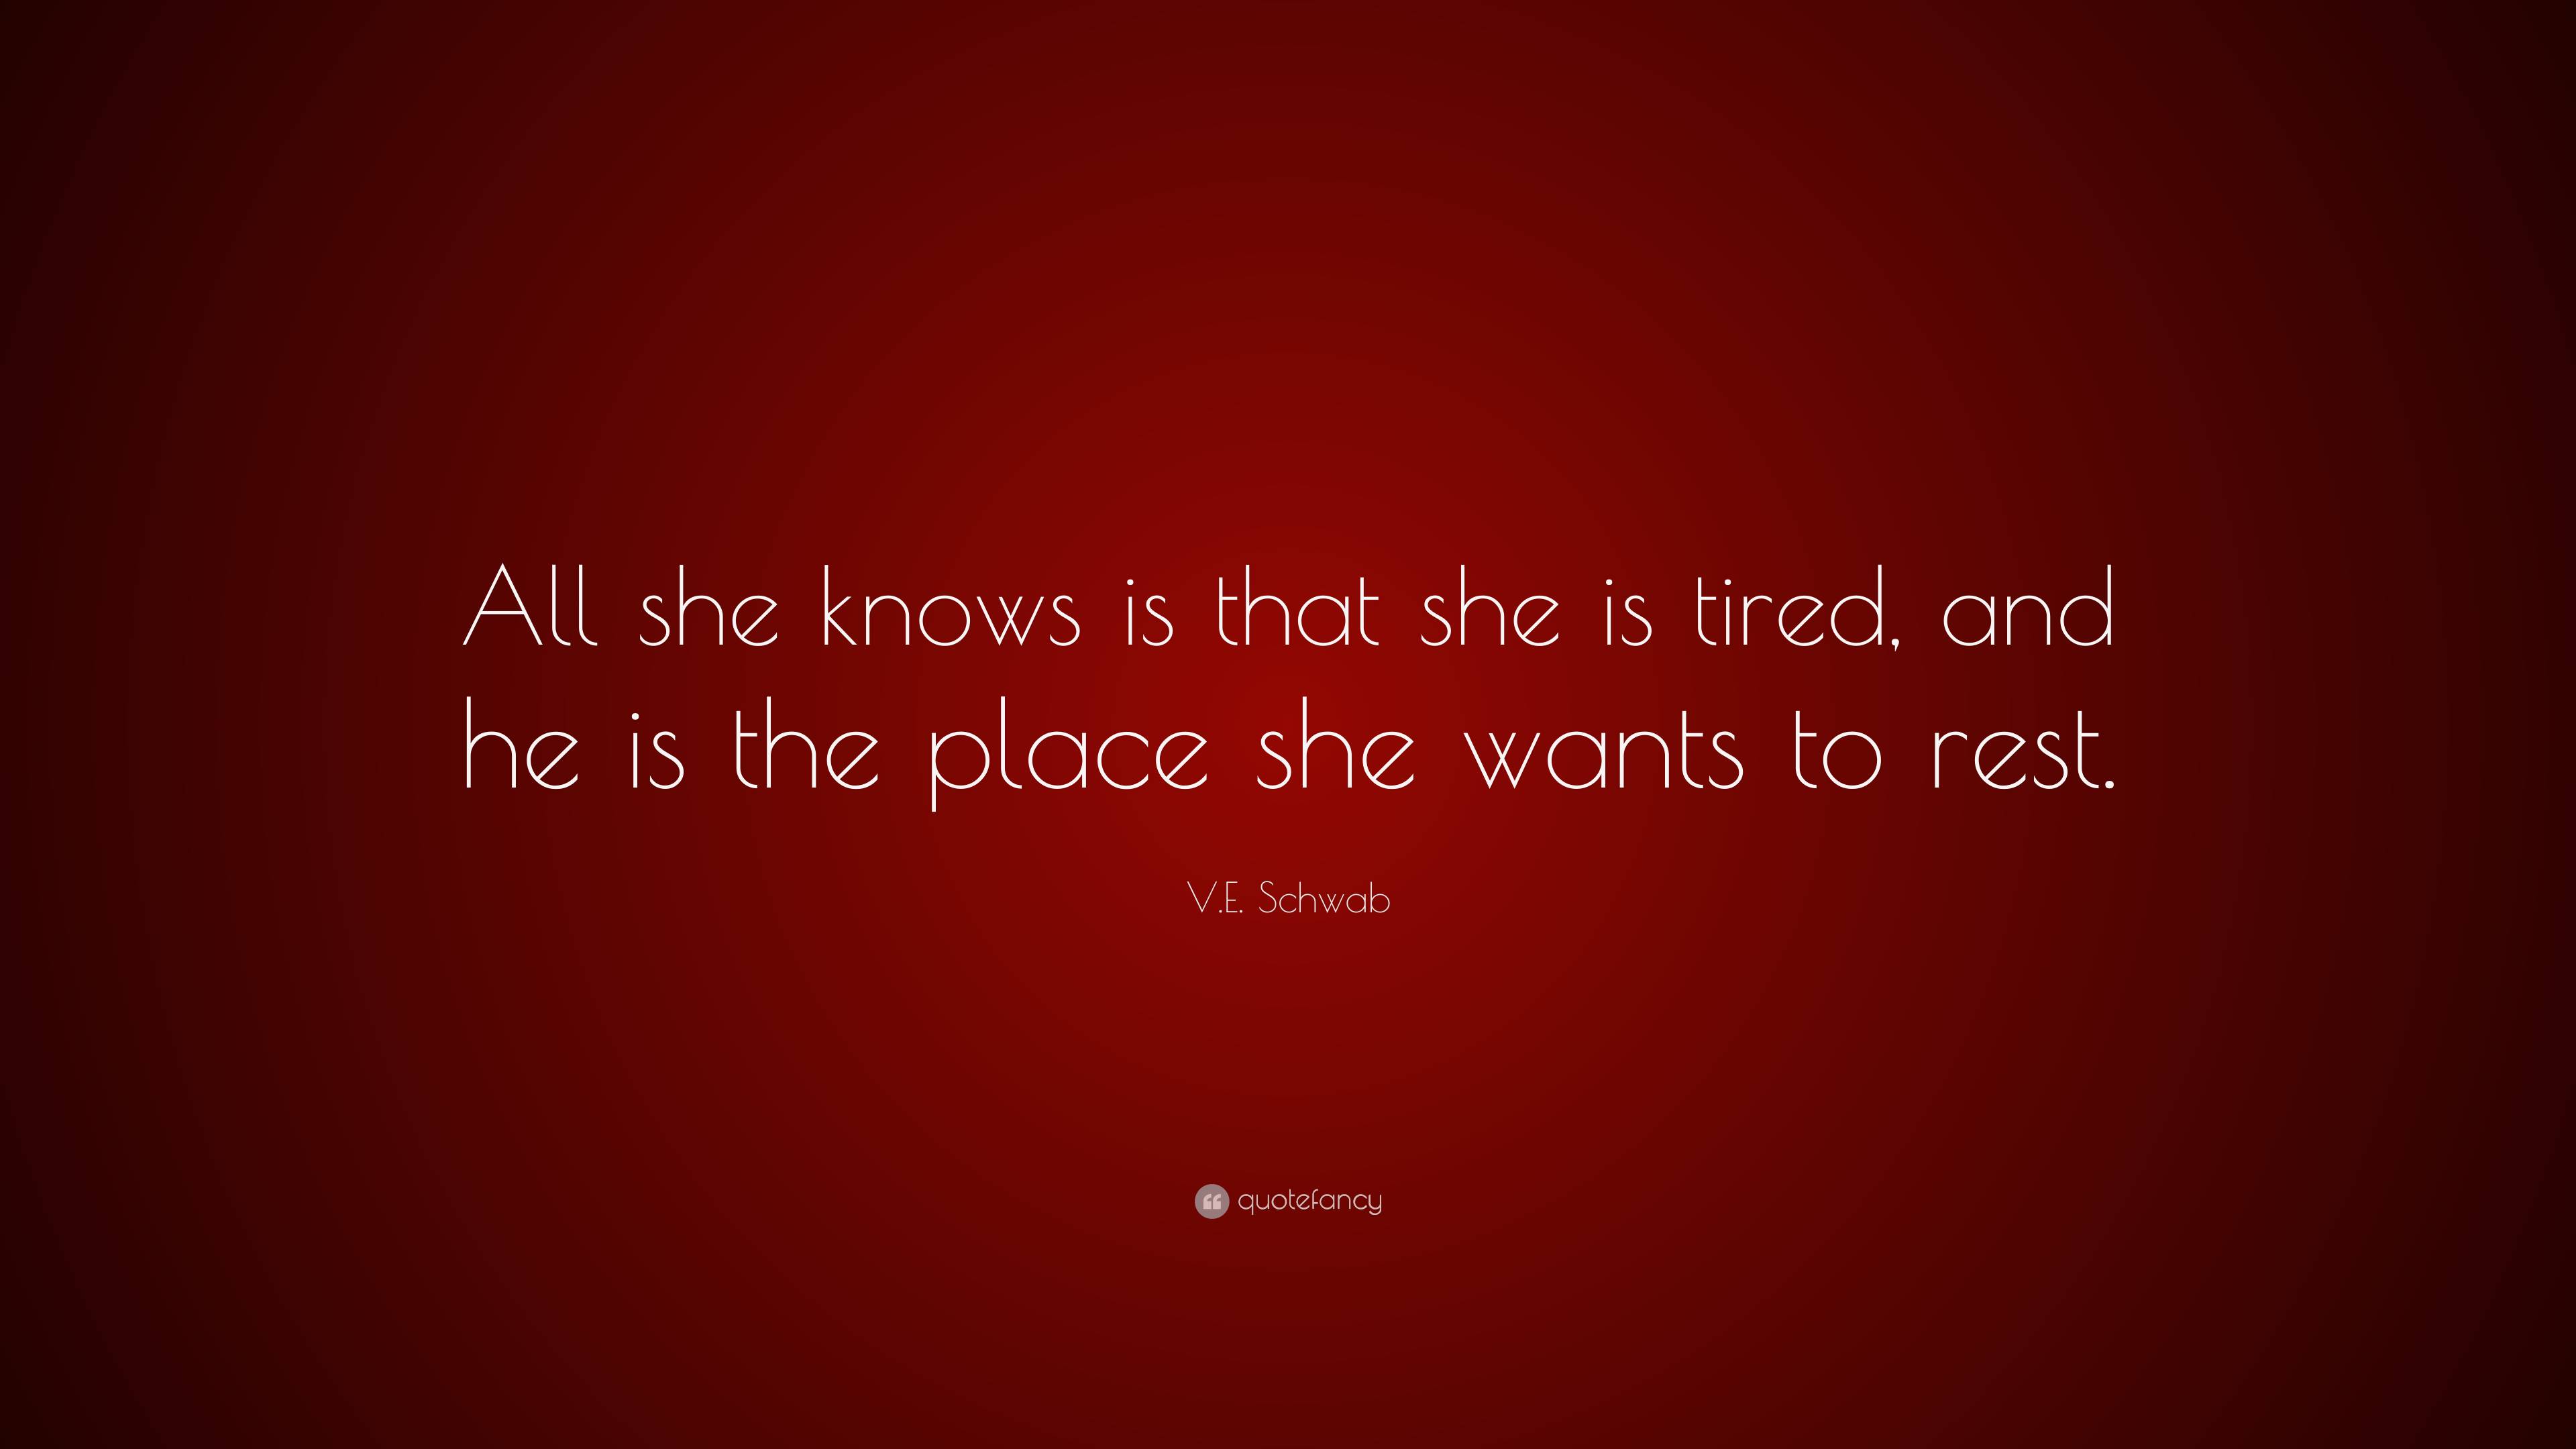 V.E. Schwab Quote: “All she knows is that she is tired, and he is the ...